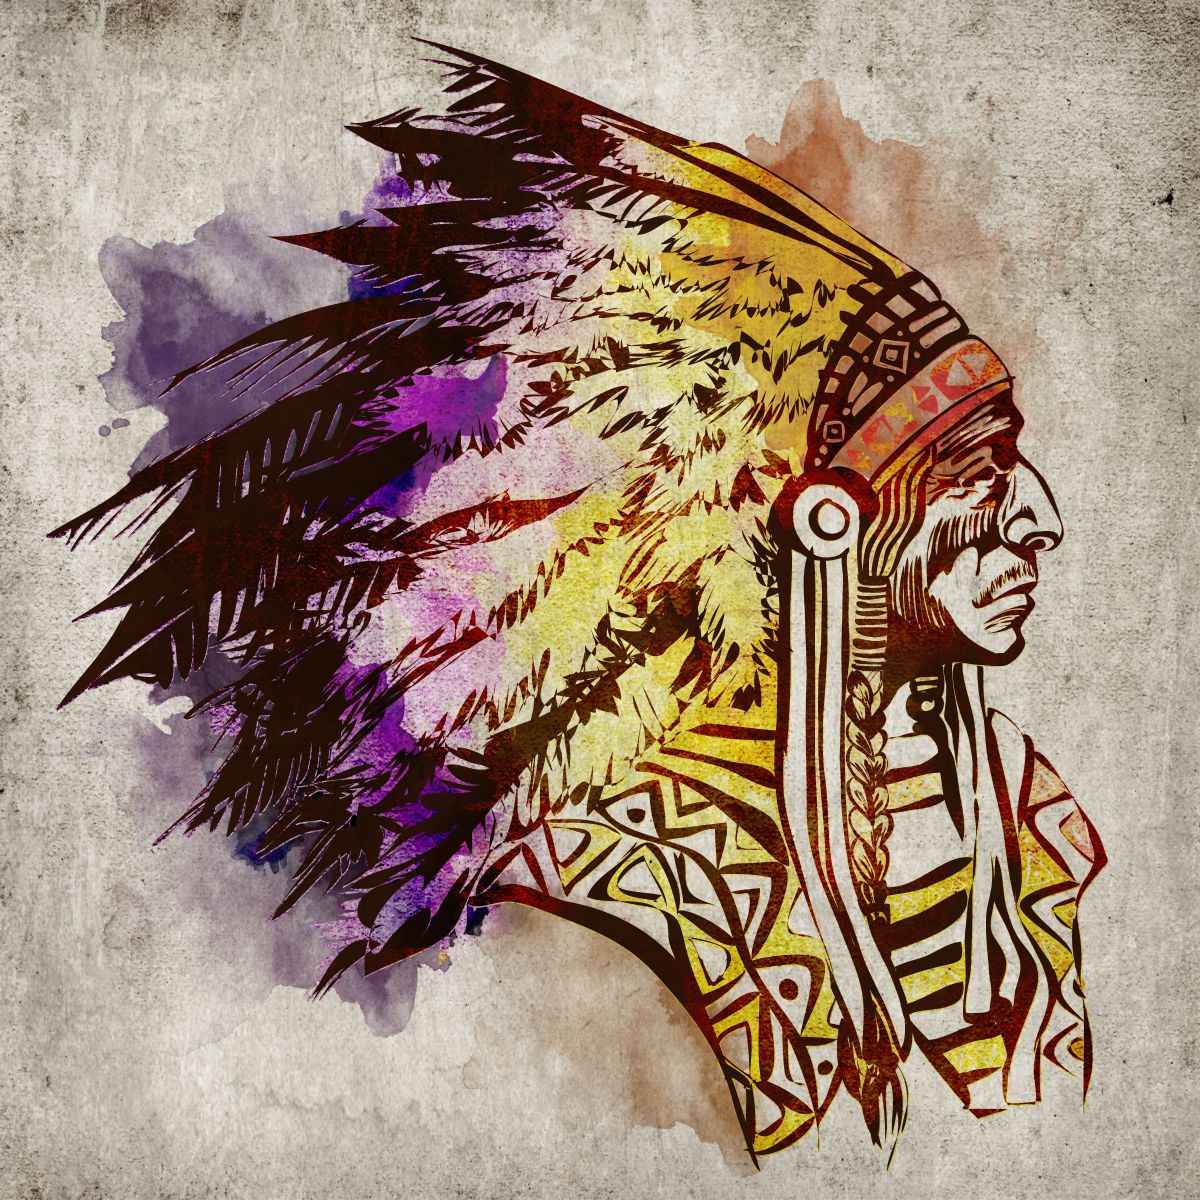 American Indian Chief